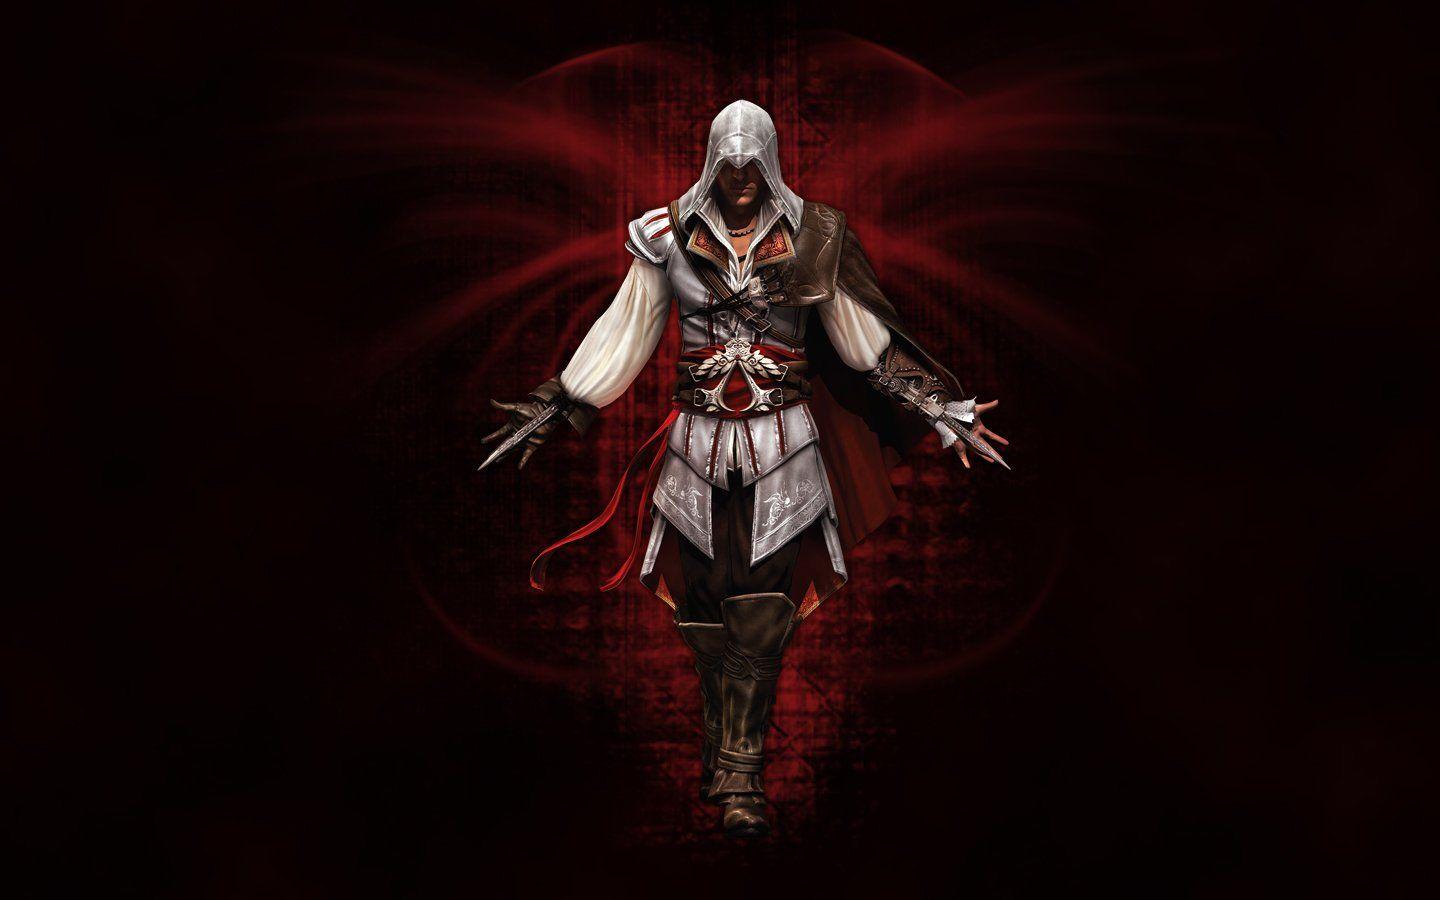 Assassin's Creed II HD Wallpaper and Background Image